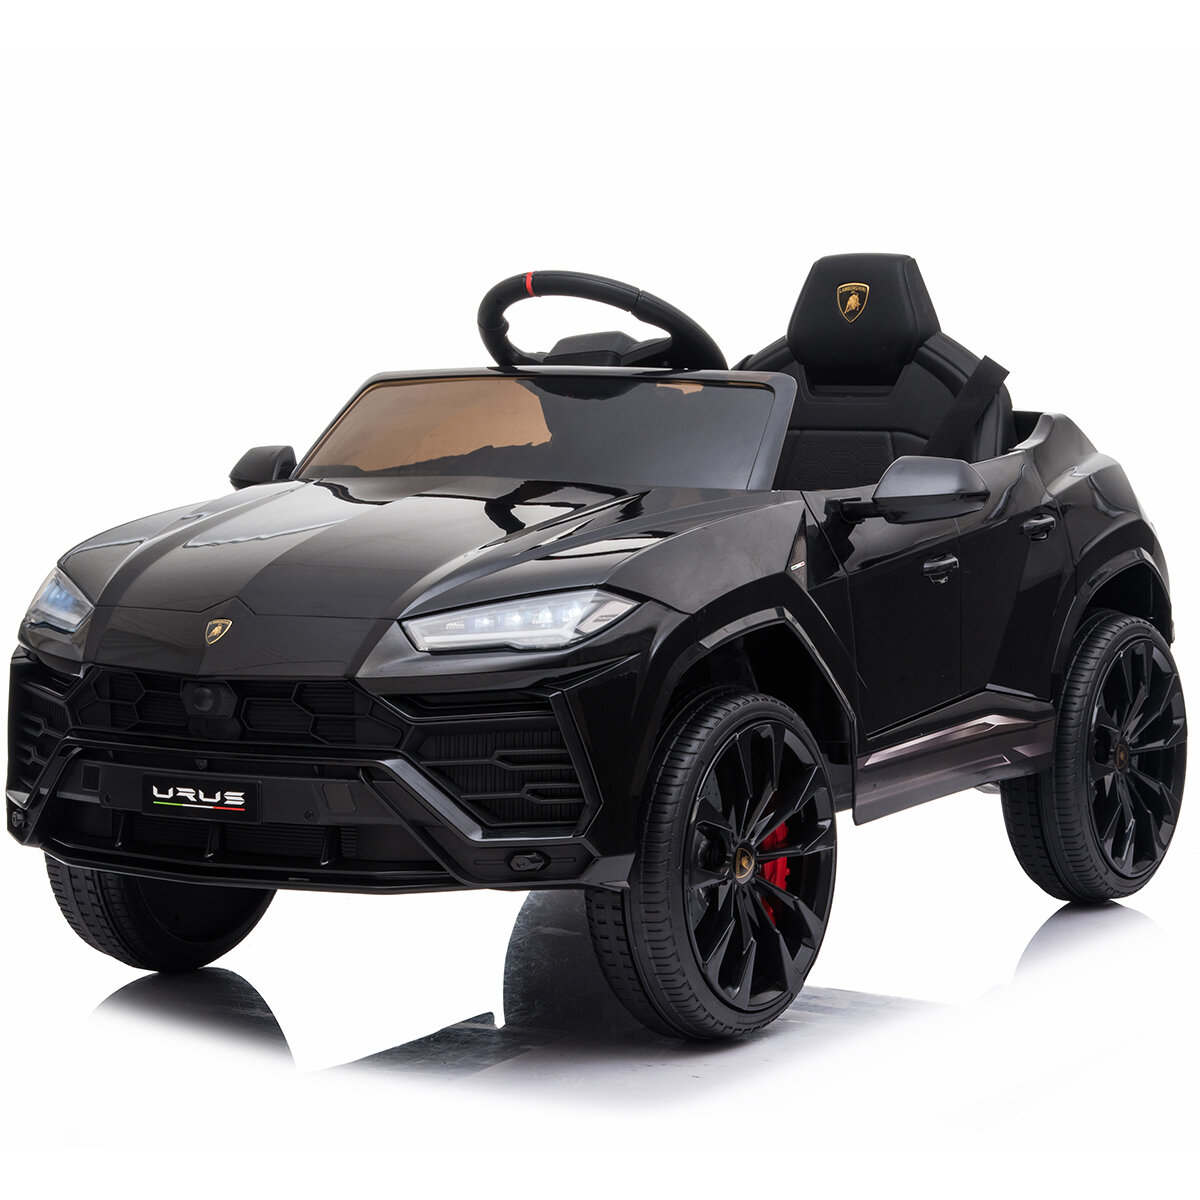 Funtok RS04 4WD 12V 4 km/h Speed Powered Kids Electric Ride on Cars Truck Licensed Lamborghini MP3 LED Headlights Remote